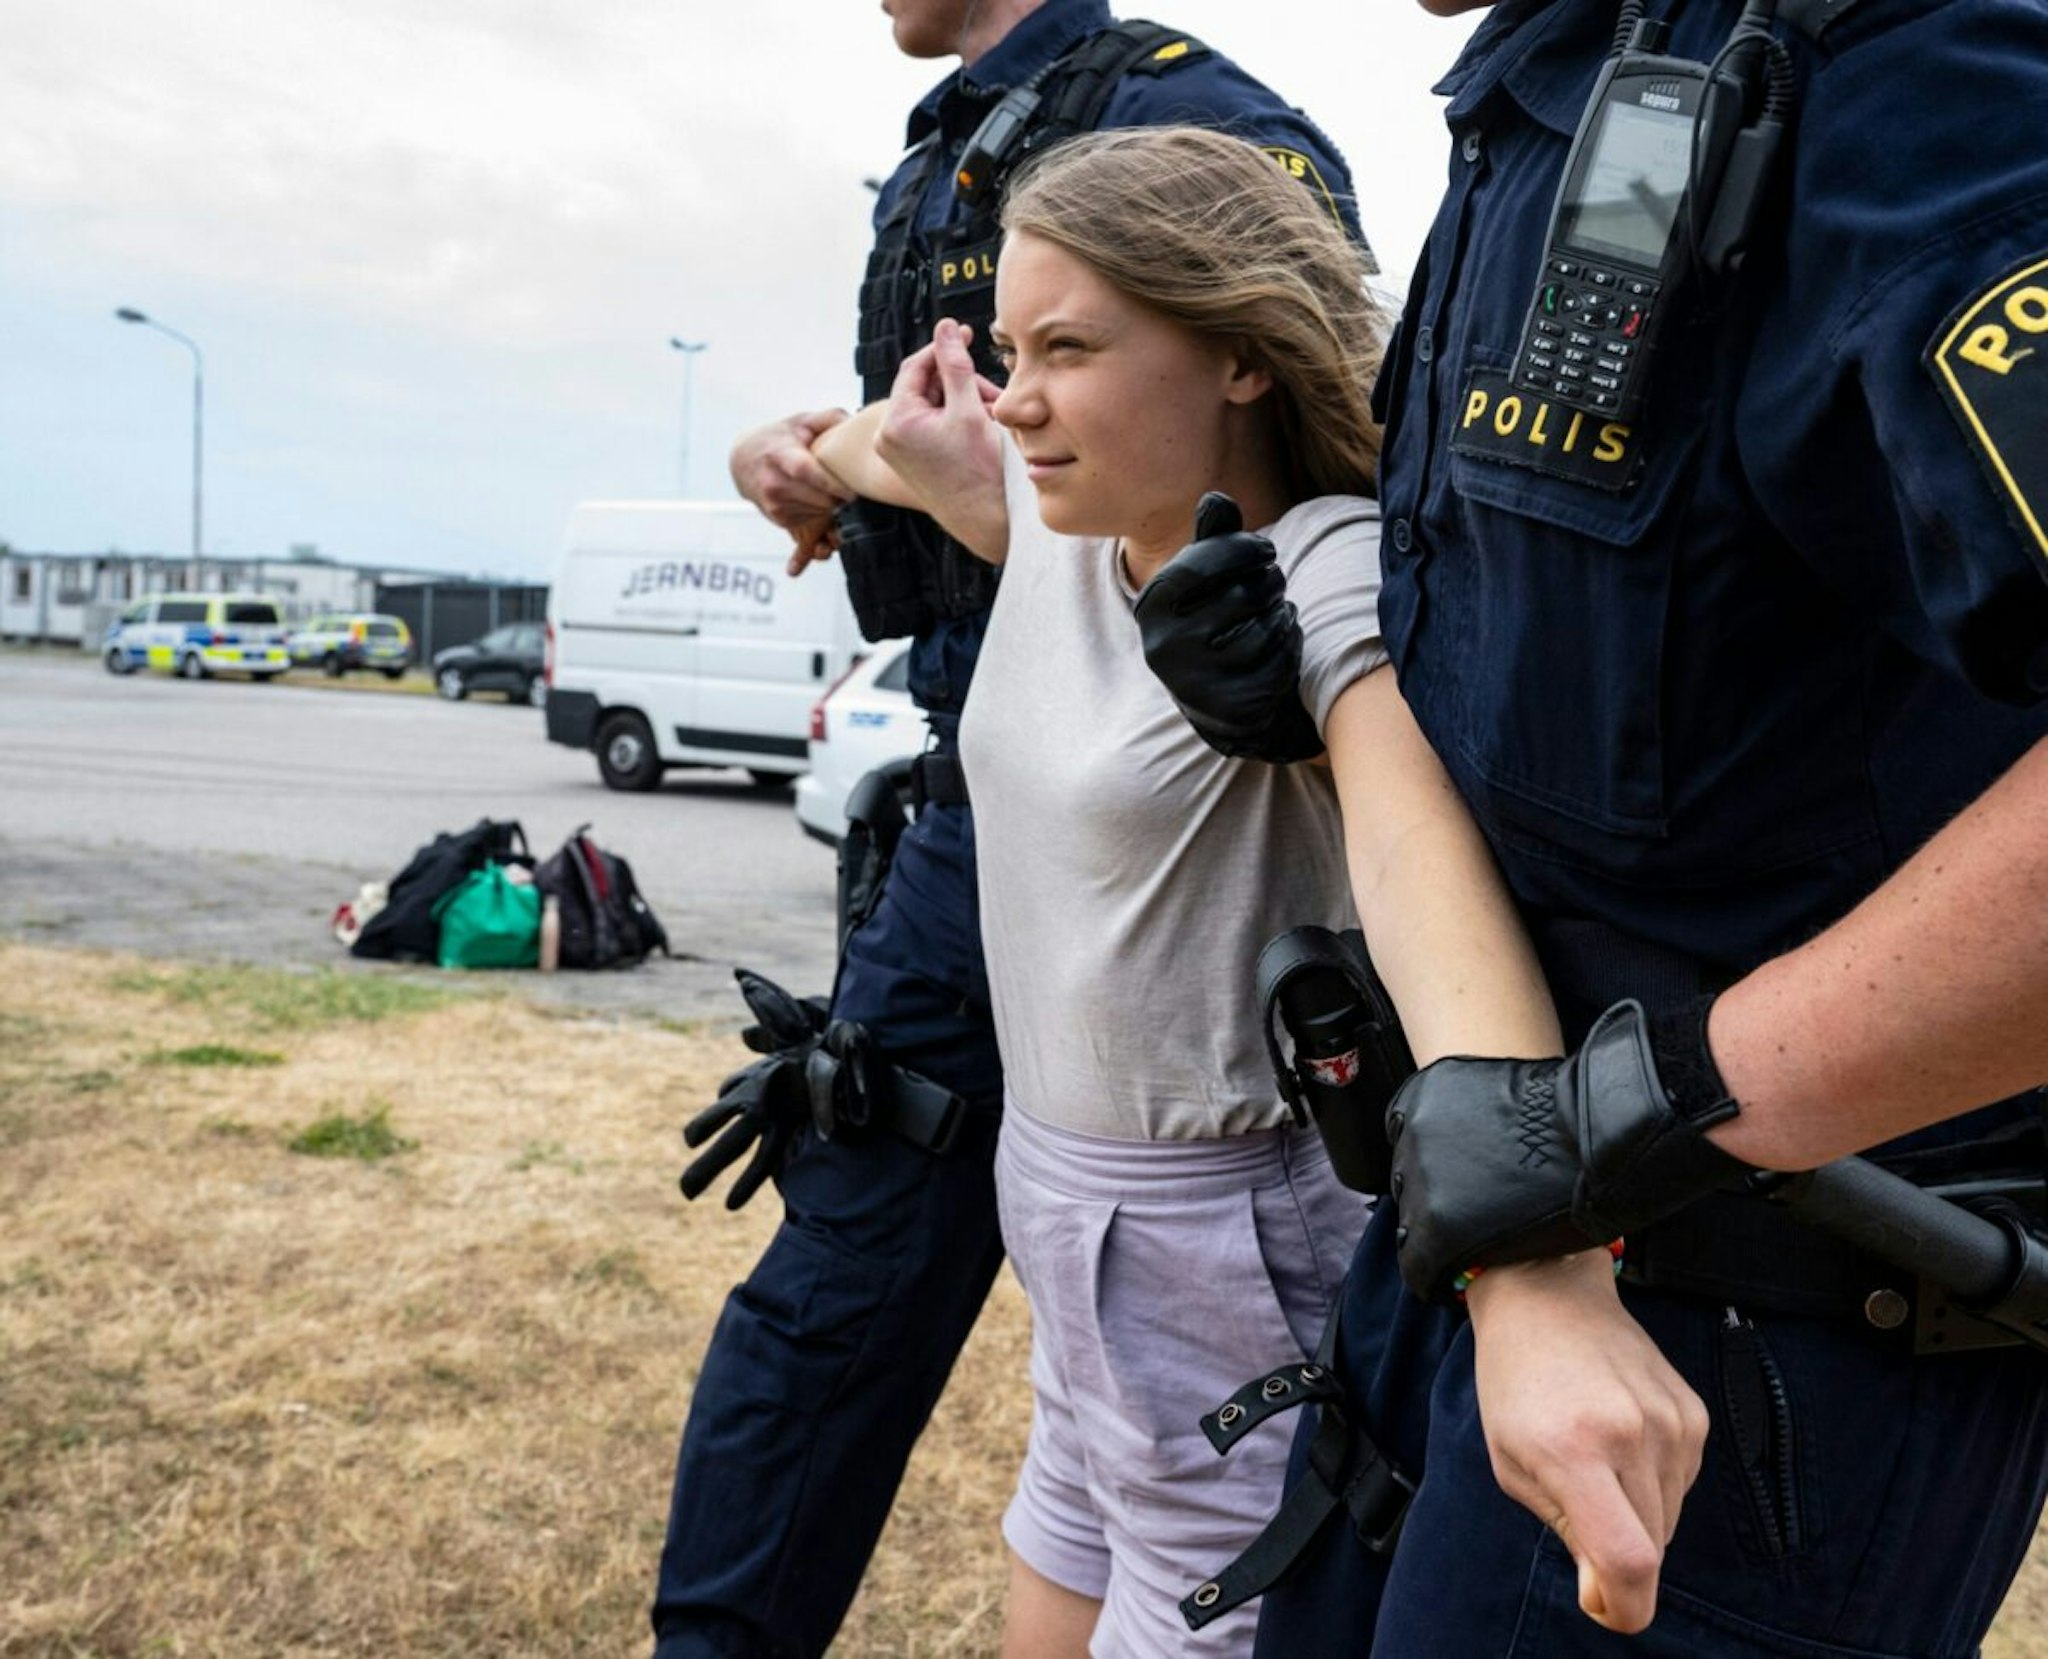 Police officers carry Swedish climate activist Greta Thunberg away together with other climate activists from the organization 'Ta Tillbaka Framtiden' (Take Back the Future), who block the entrance to Oljehamnen neighbourhood in Malmo, Sweden, on June 19, 2023, for the 5th day in a row.